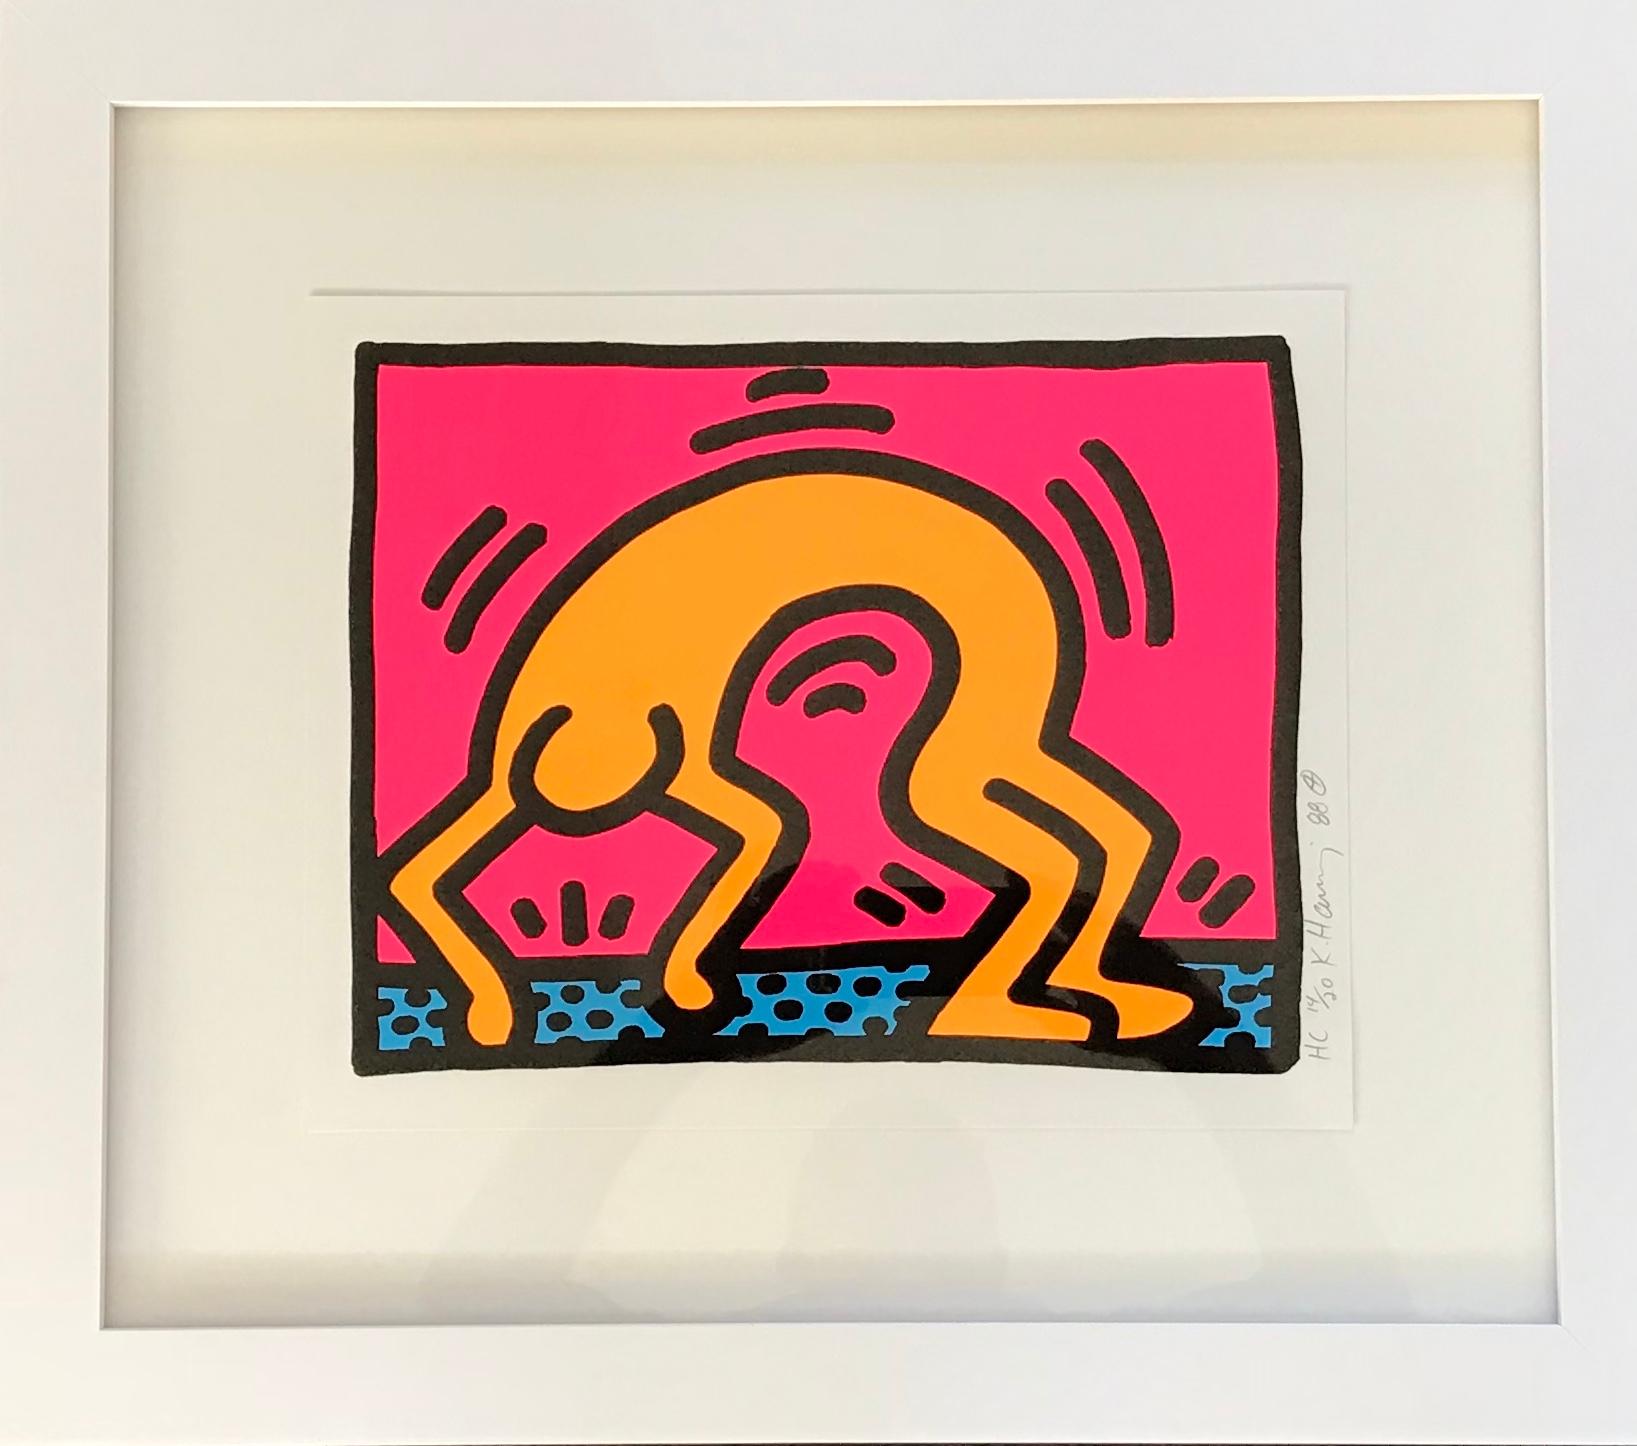 Pop Shop II (2) - Contemporary Print by Keith Haring